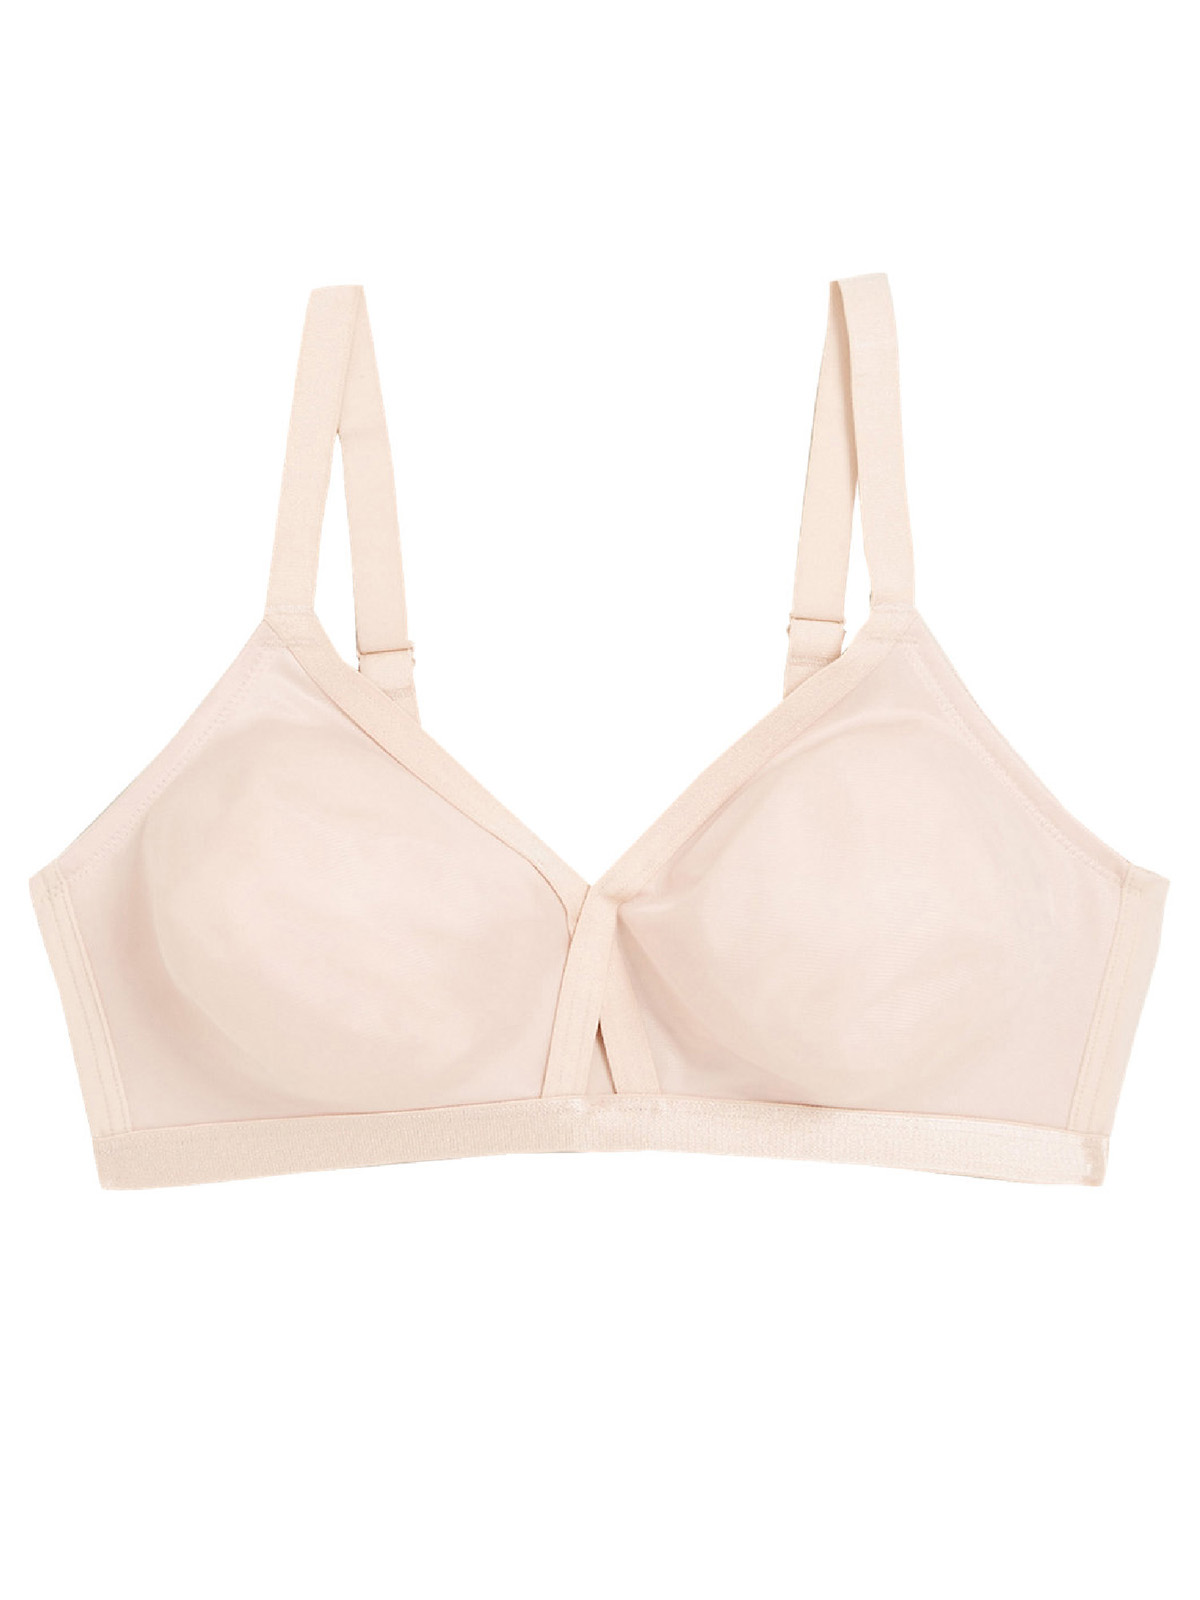 Marks and Spencer - - M&5 ALMOND Full Cup Crossover Non-Wired Bra ...